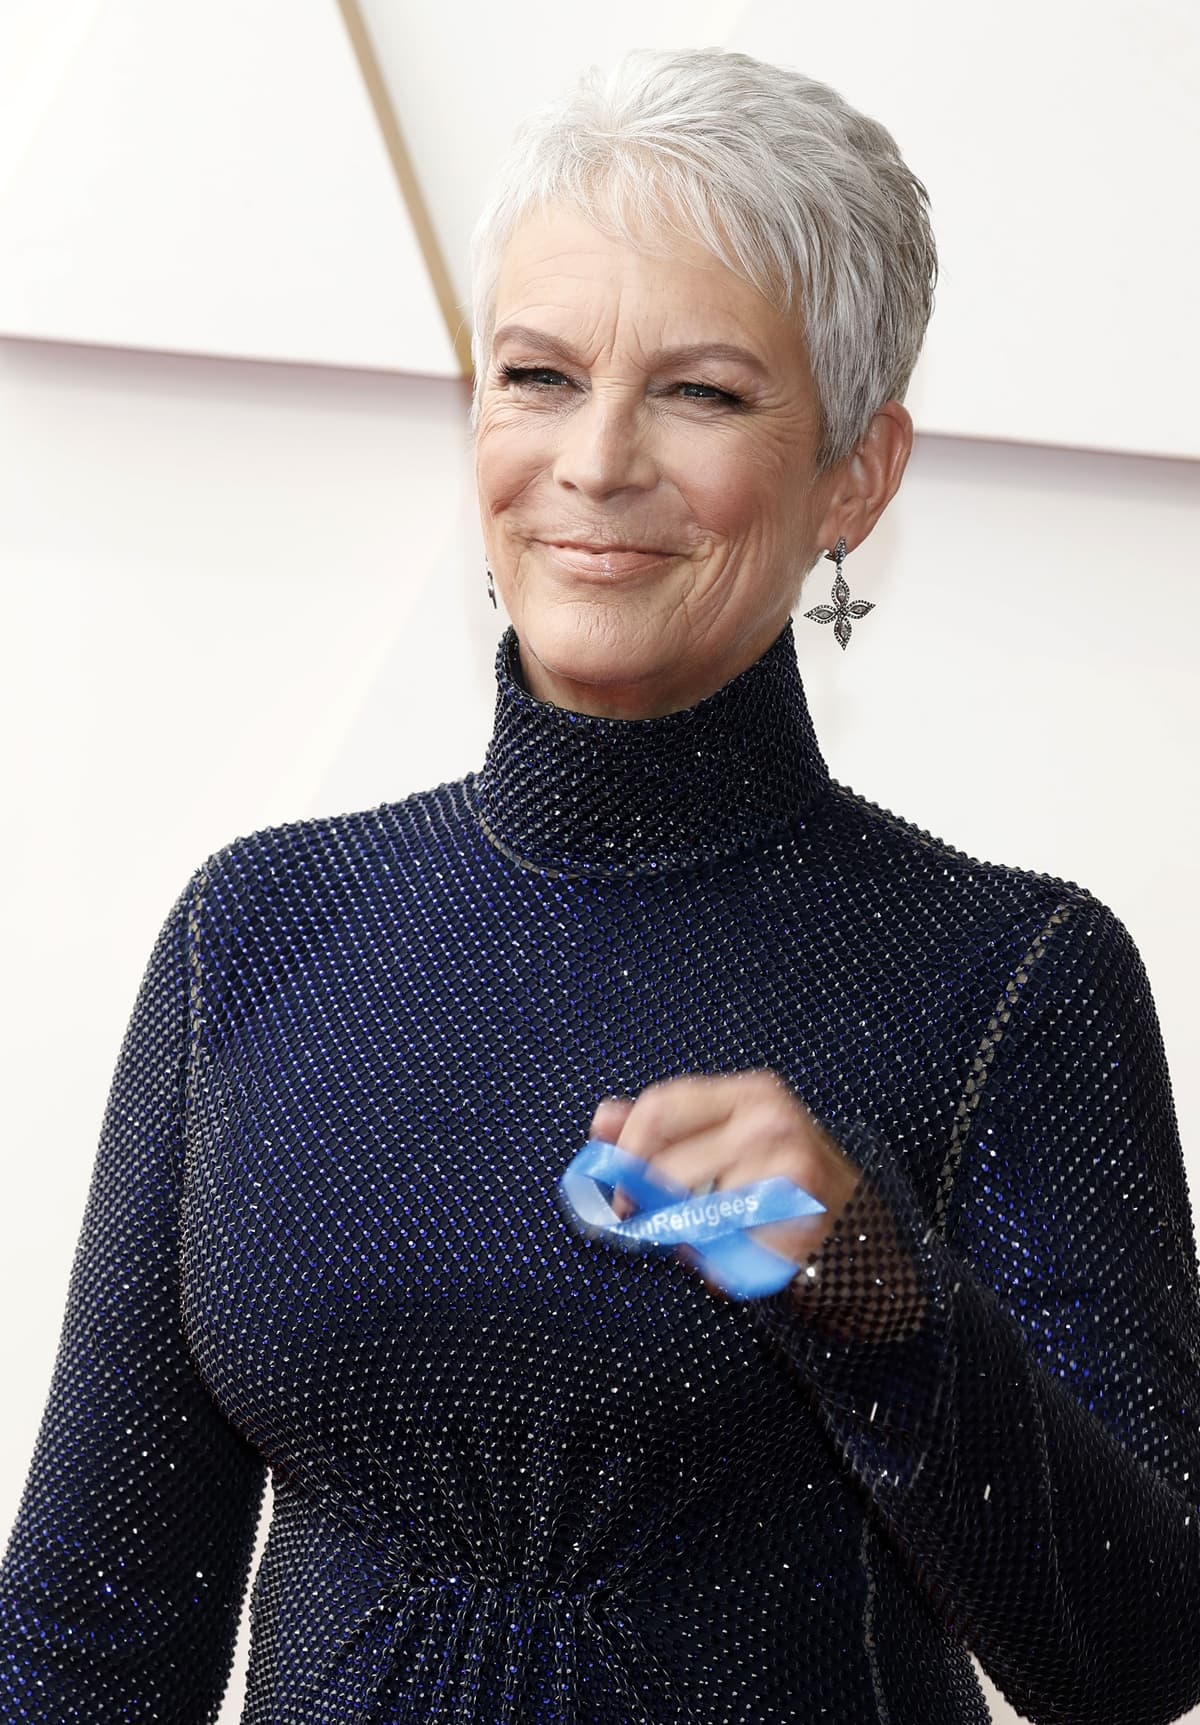 Jamie Lee Curtis shows off her Cathy Waterman ethically sourced diamond marquise star earrings and blue “Stand With Refugees” ribbon